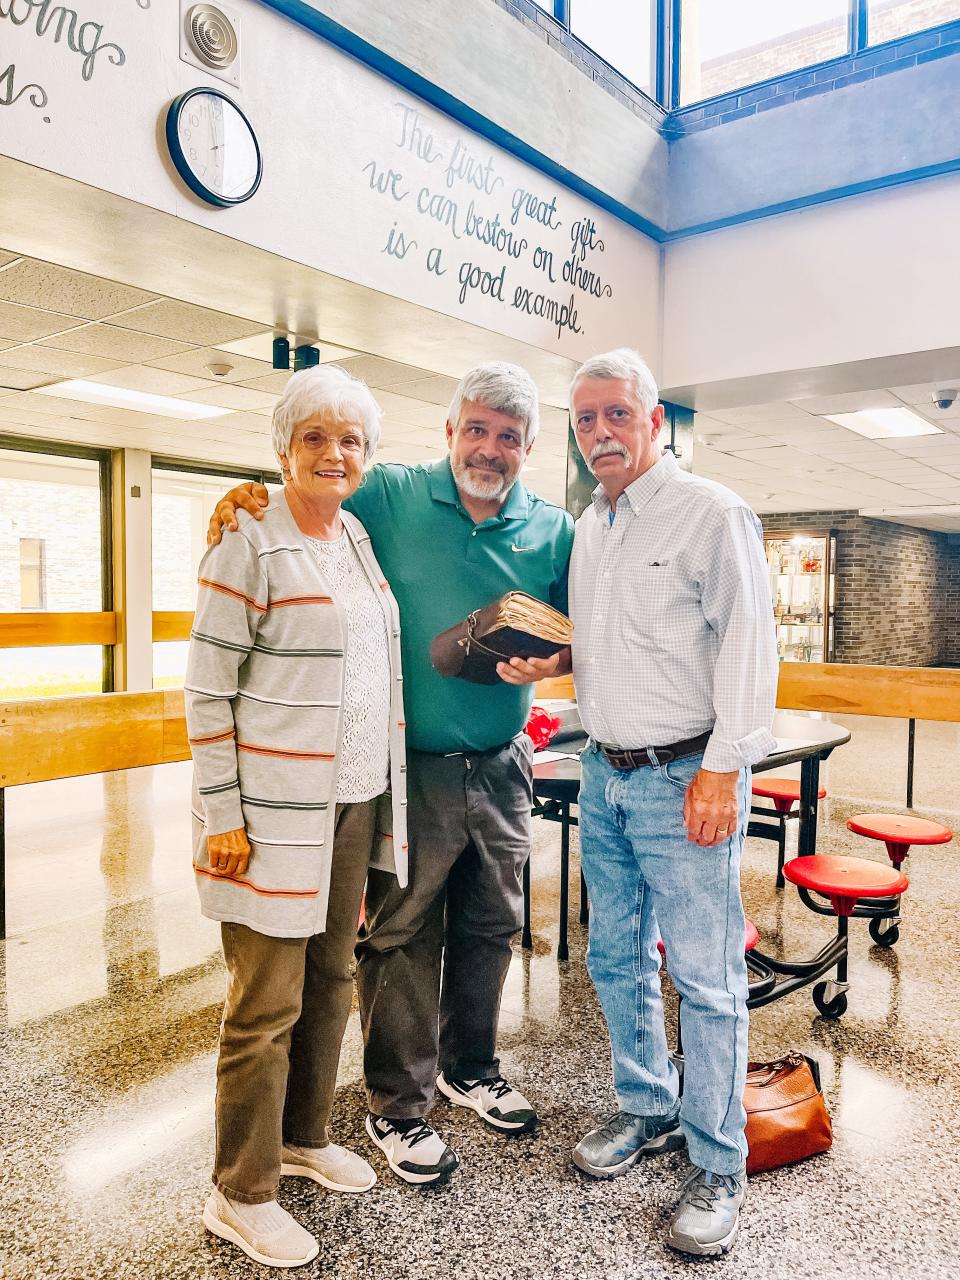 Lambert’s parents, Gail and James Lambert, drove down from Kentucky to be part of the schoolwide celebration and their son’s retirement. Students and staff gifted Lambert with the leather-bound notecards.